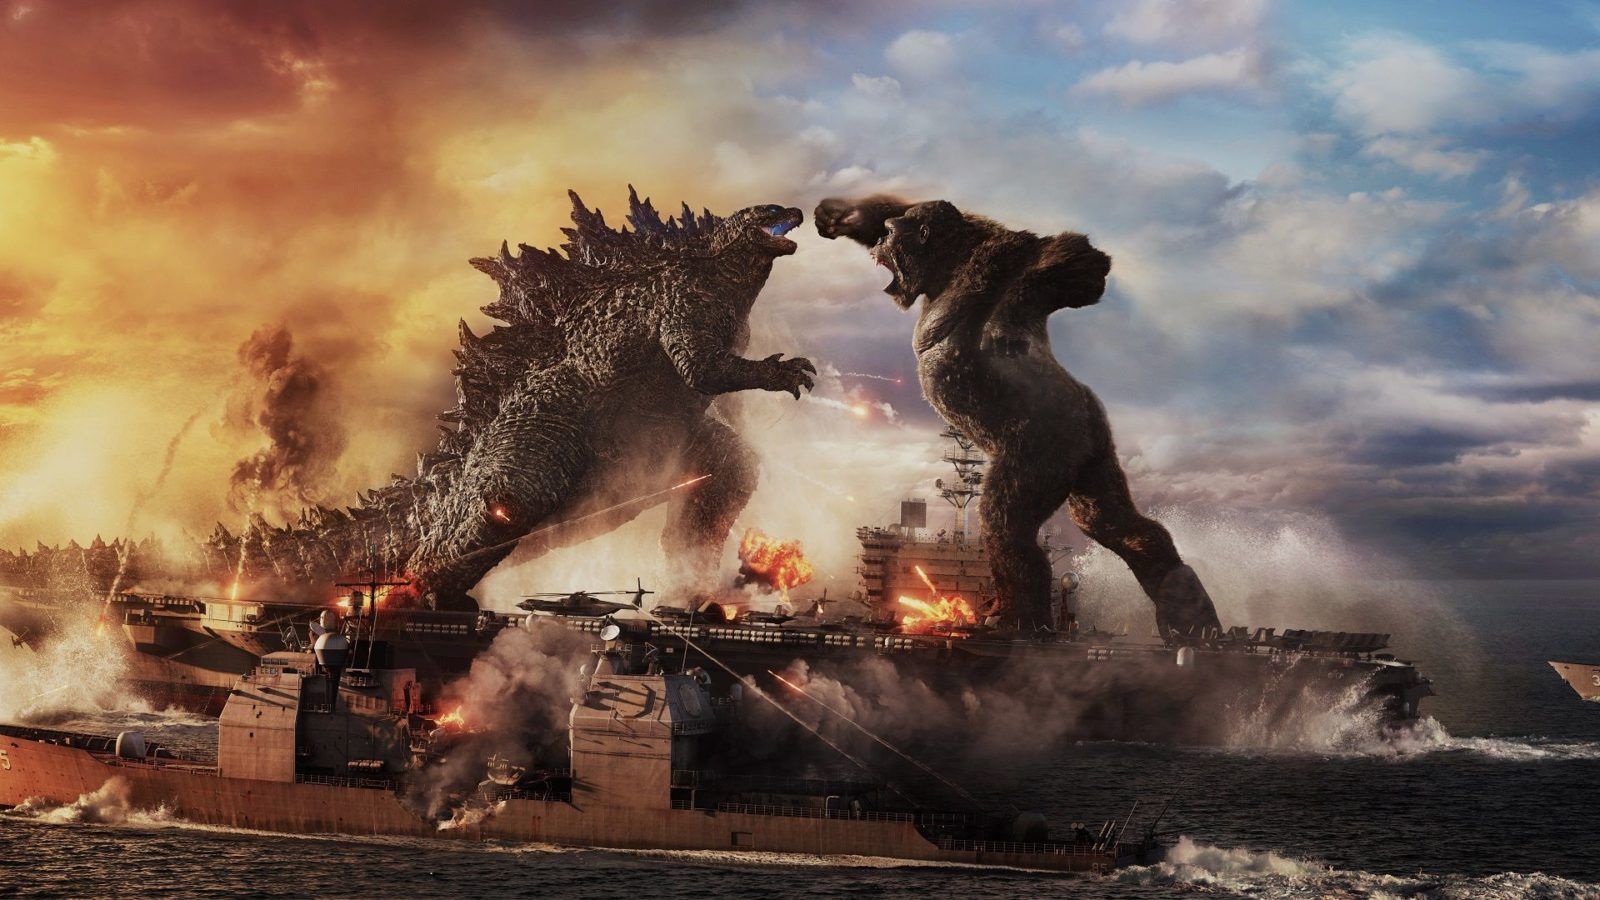 Godzilla and King Kong confirmed to appear in ‘Call of Duty: Warzone’